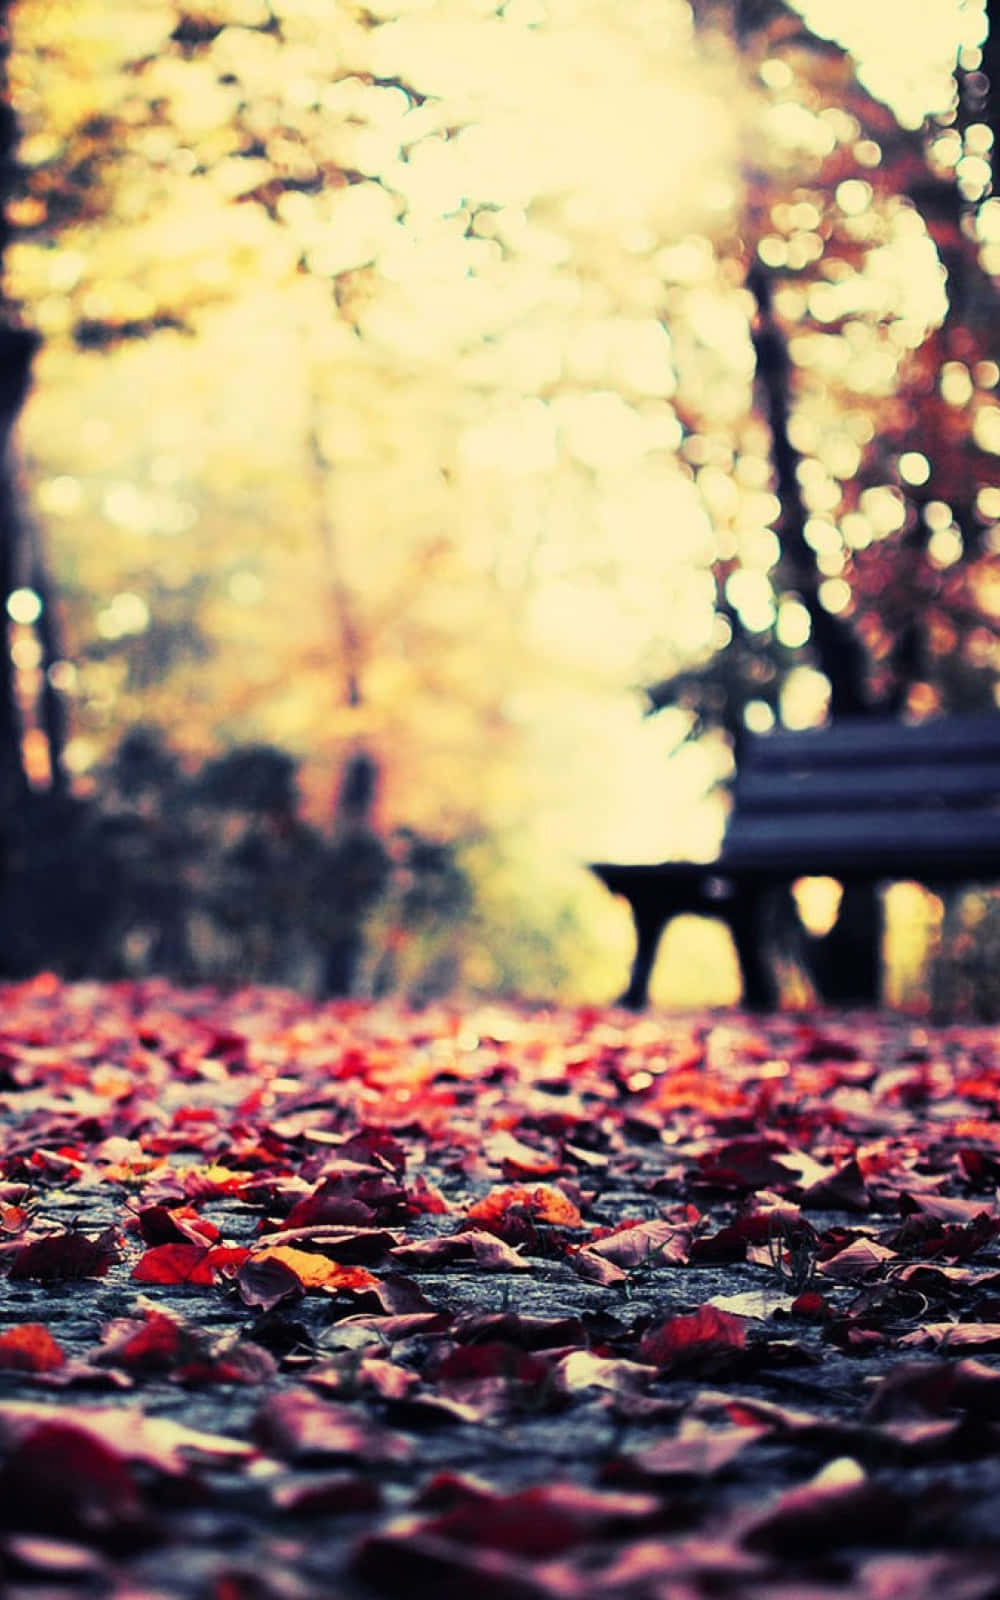 Explore New Possibilities with the Autumn Iphone 6 Plus Wallpaper